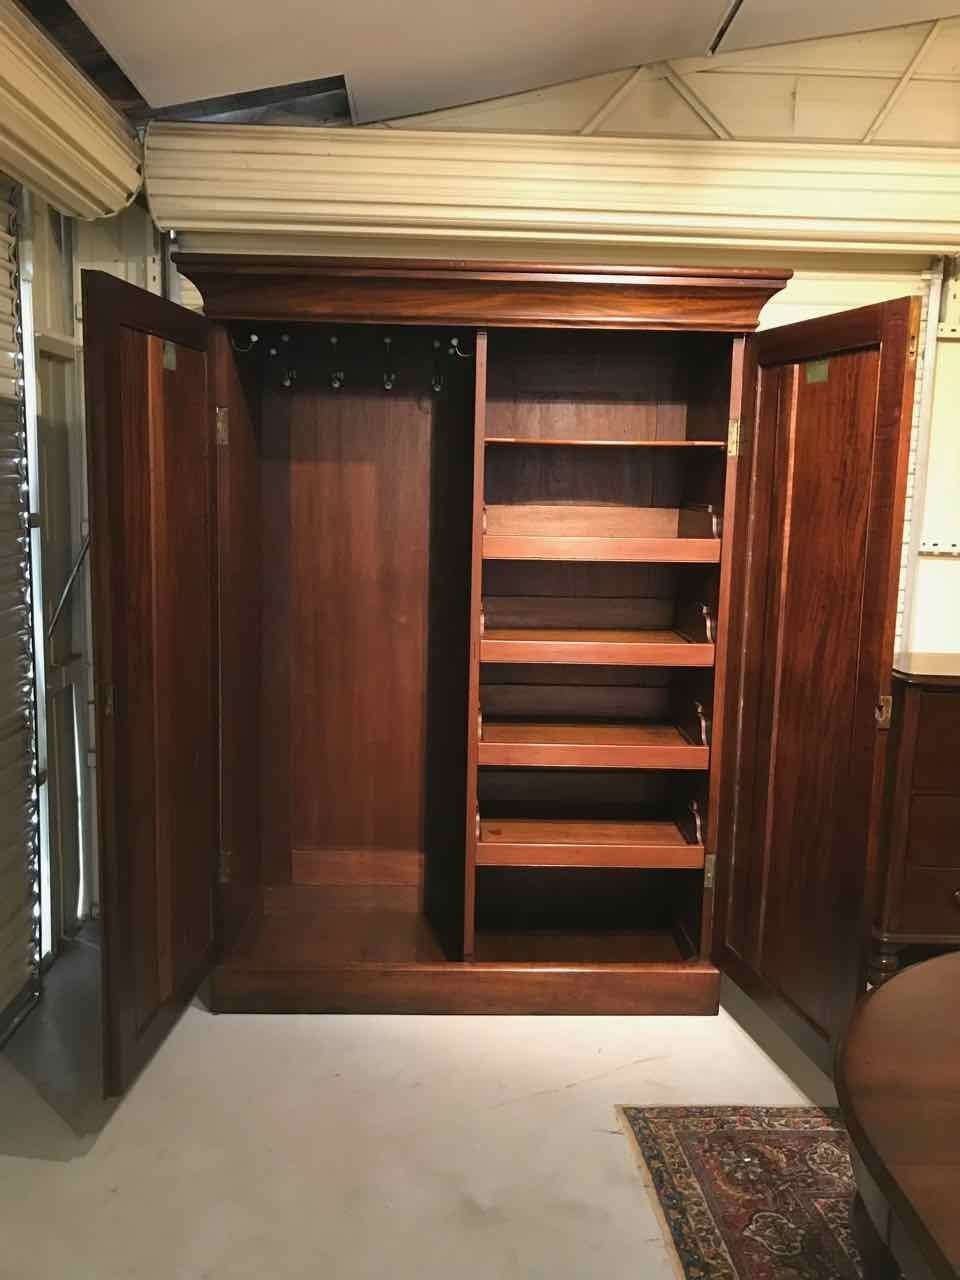 2018 Discount Wardrobes Within Furniture : Collapsible Wardrobe Portable Wardrobe Ikea Wardrobe (View 10 of 15)